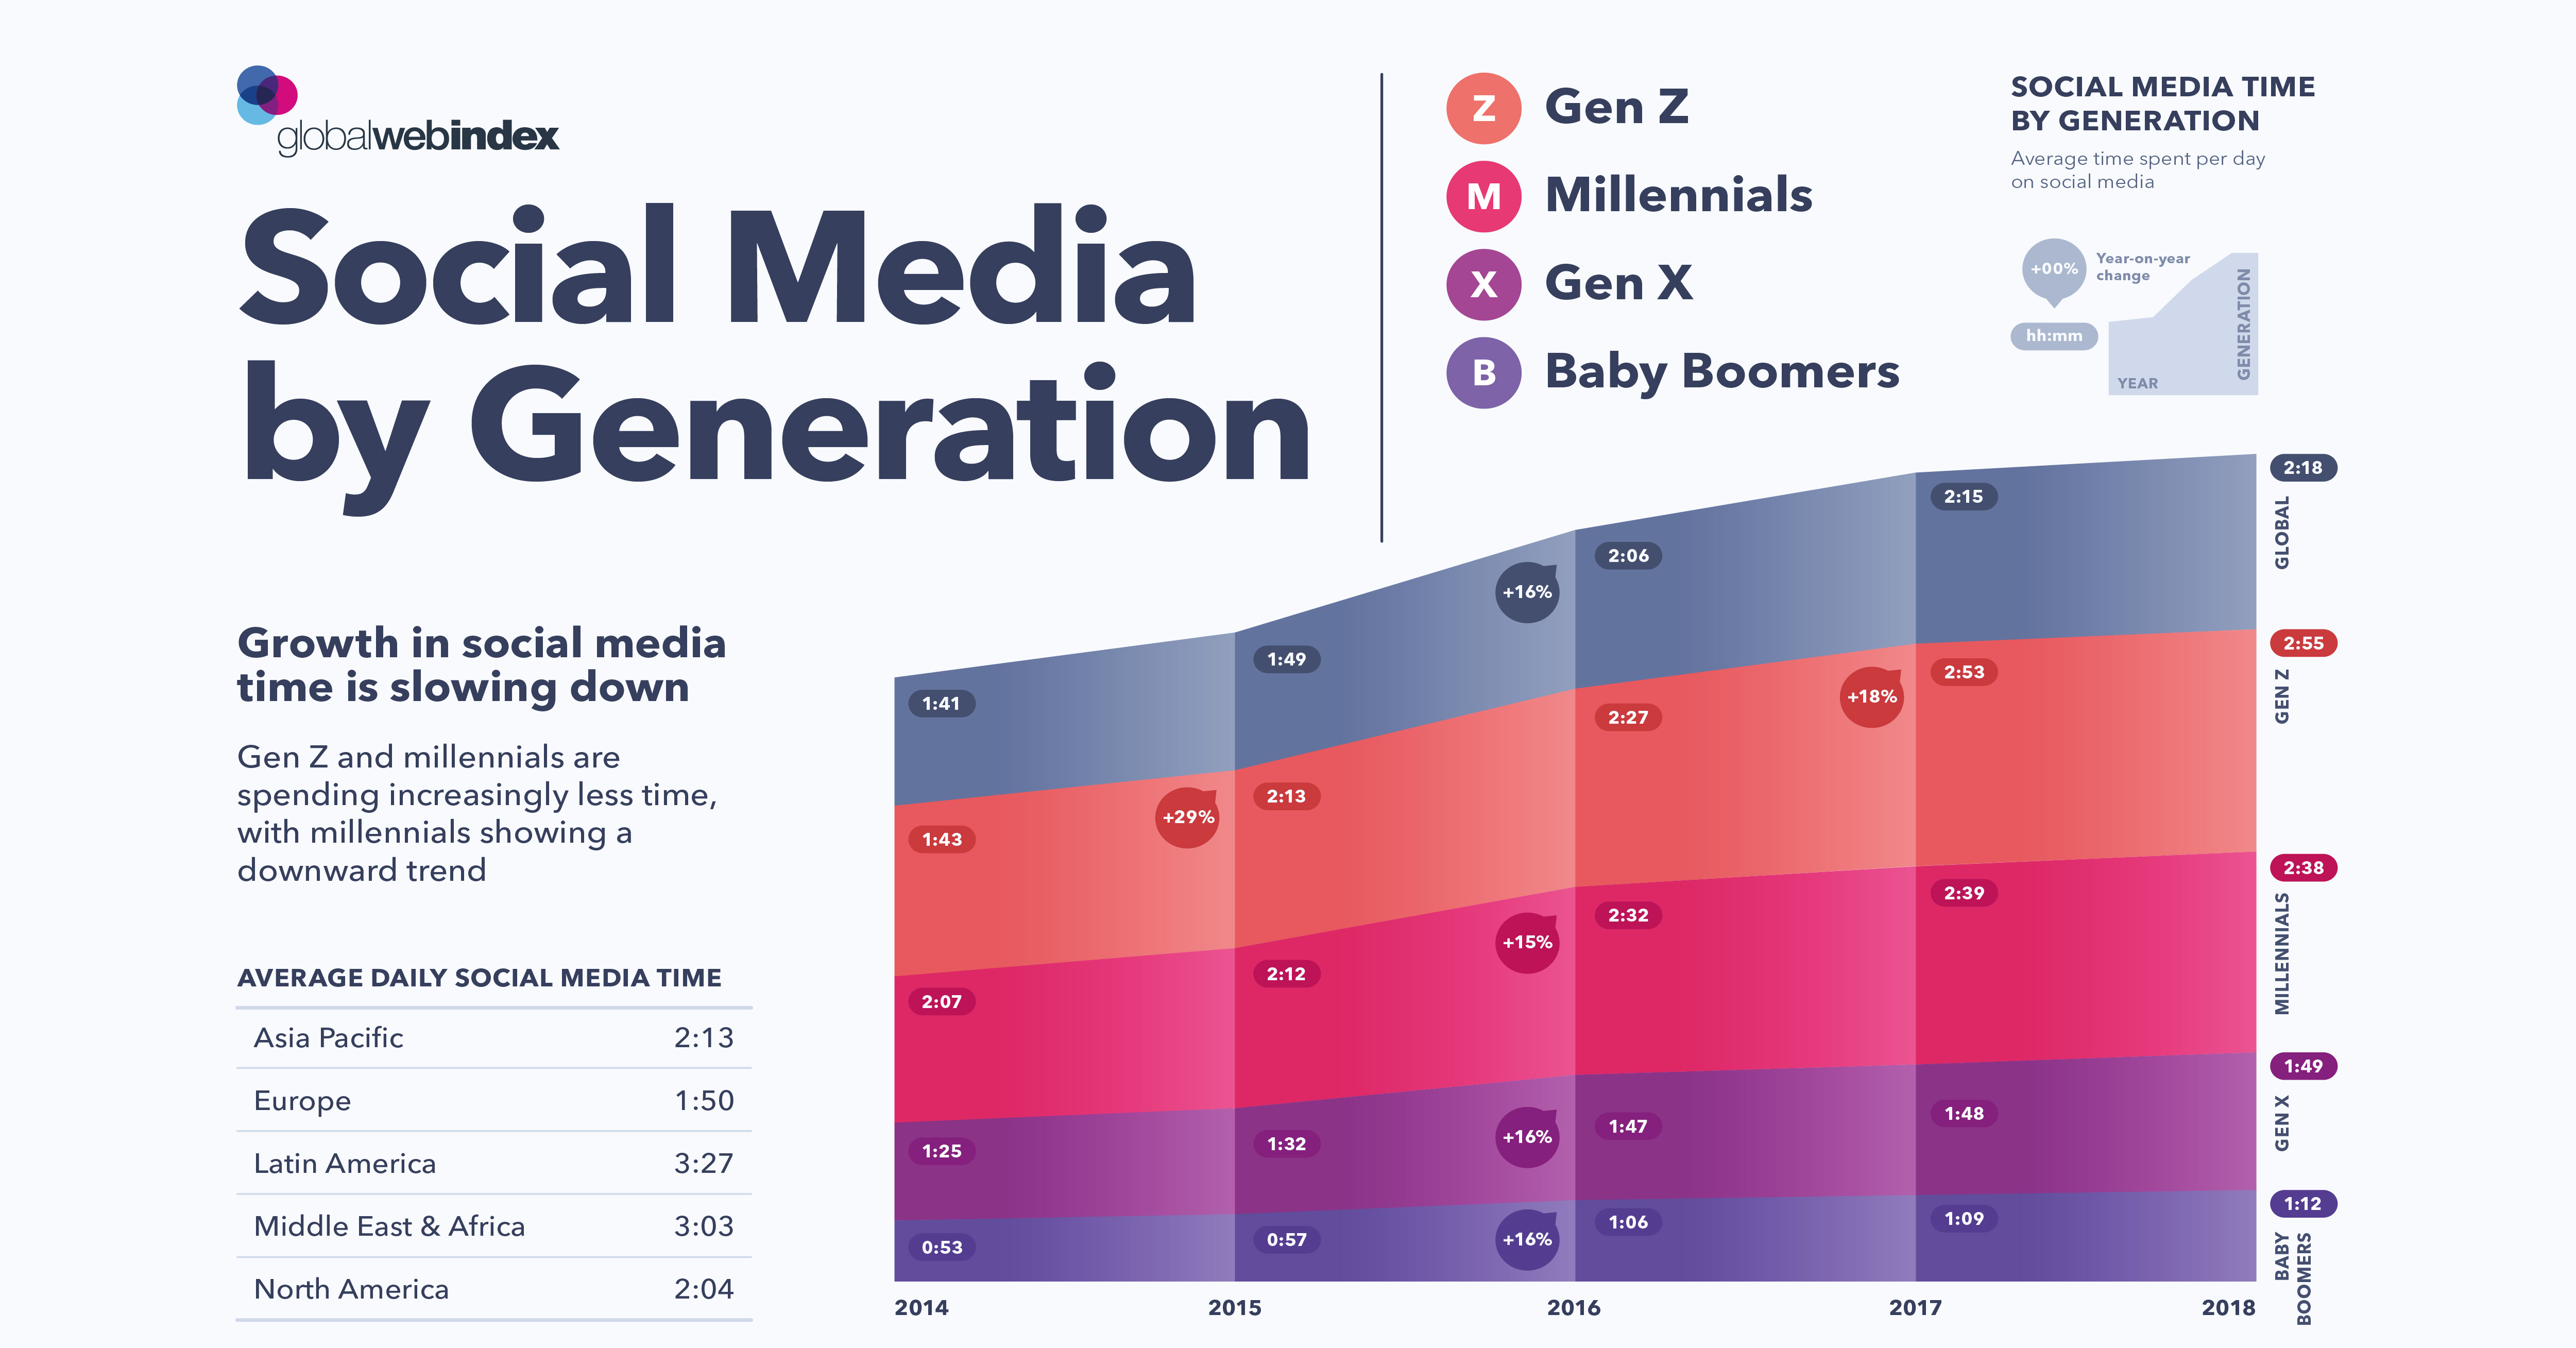  A bar chart race visualizes the average time spent on social media by generation from 2014 to 2018. The chart shows that the average time spent on social media per day is highest among Gen Z, followed by Millennials, Gen X, and Baby Boomers. The chart also shows that the growth of social media usage is slowing down among all generations.